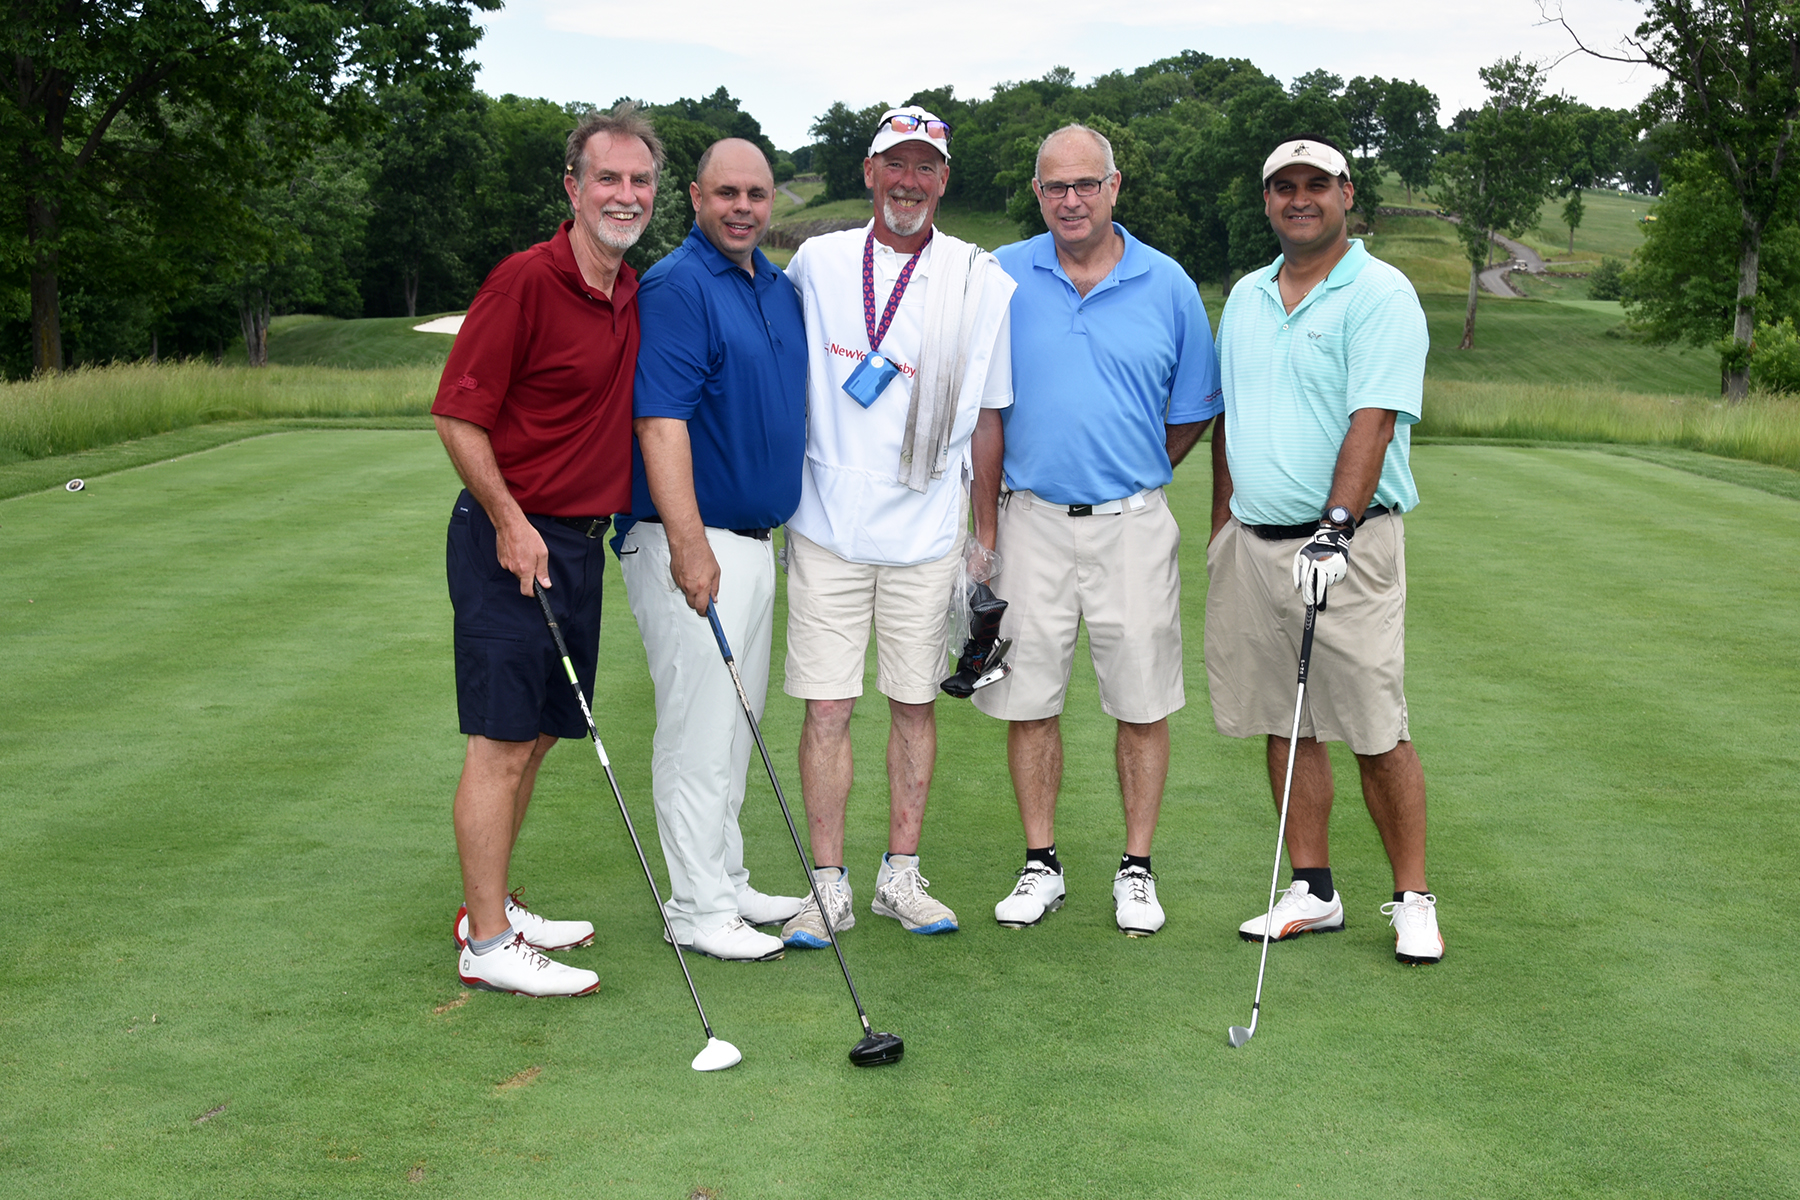 Golf Outing Raises Substantial Funds for Hospital's Growth ...